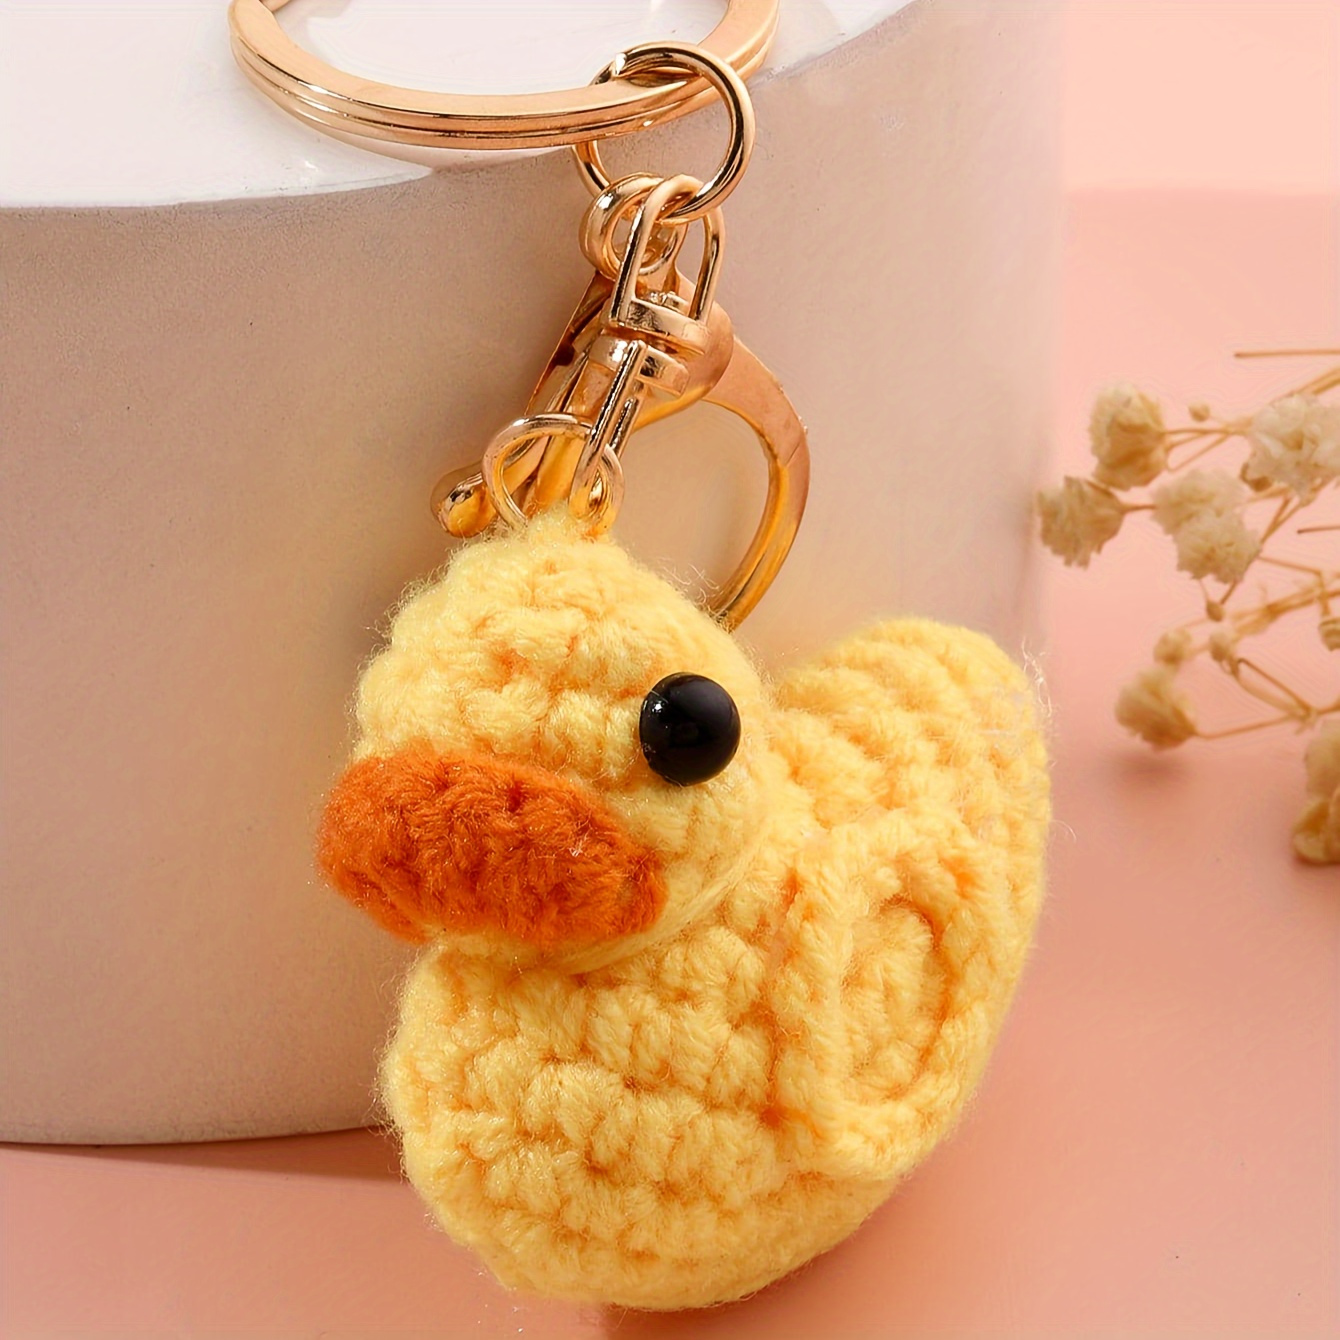 

Handmade Crochet Duck Keychain, Soft Yarn Weaved Animal Charm, Quirky Purse & Backpack Accessory, Unique Car Key Ring, Earbud Holder